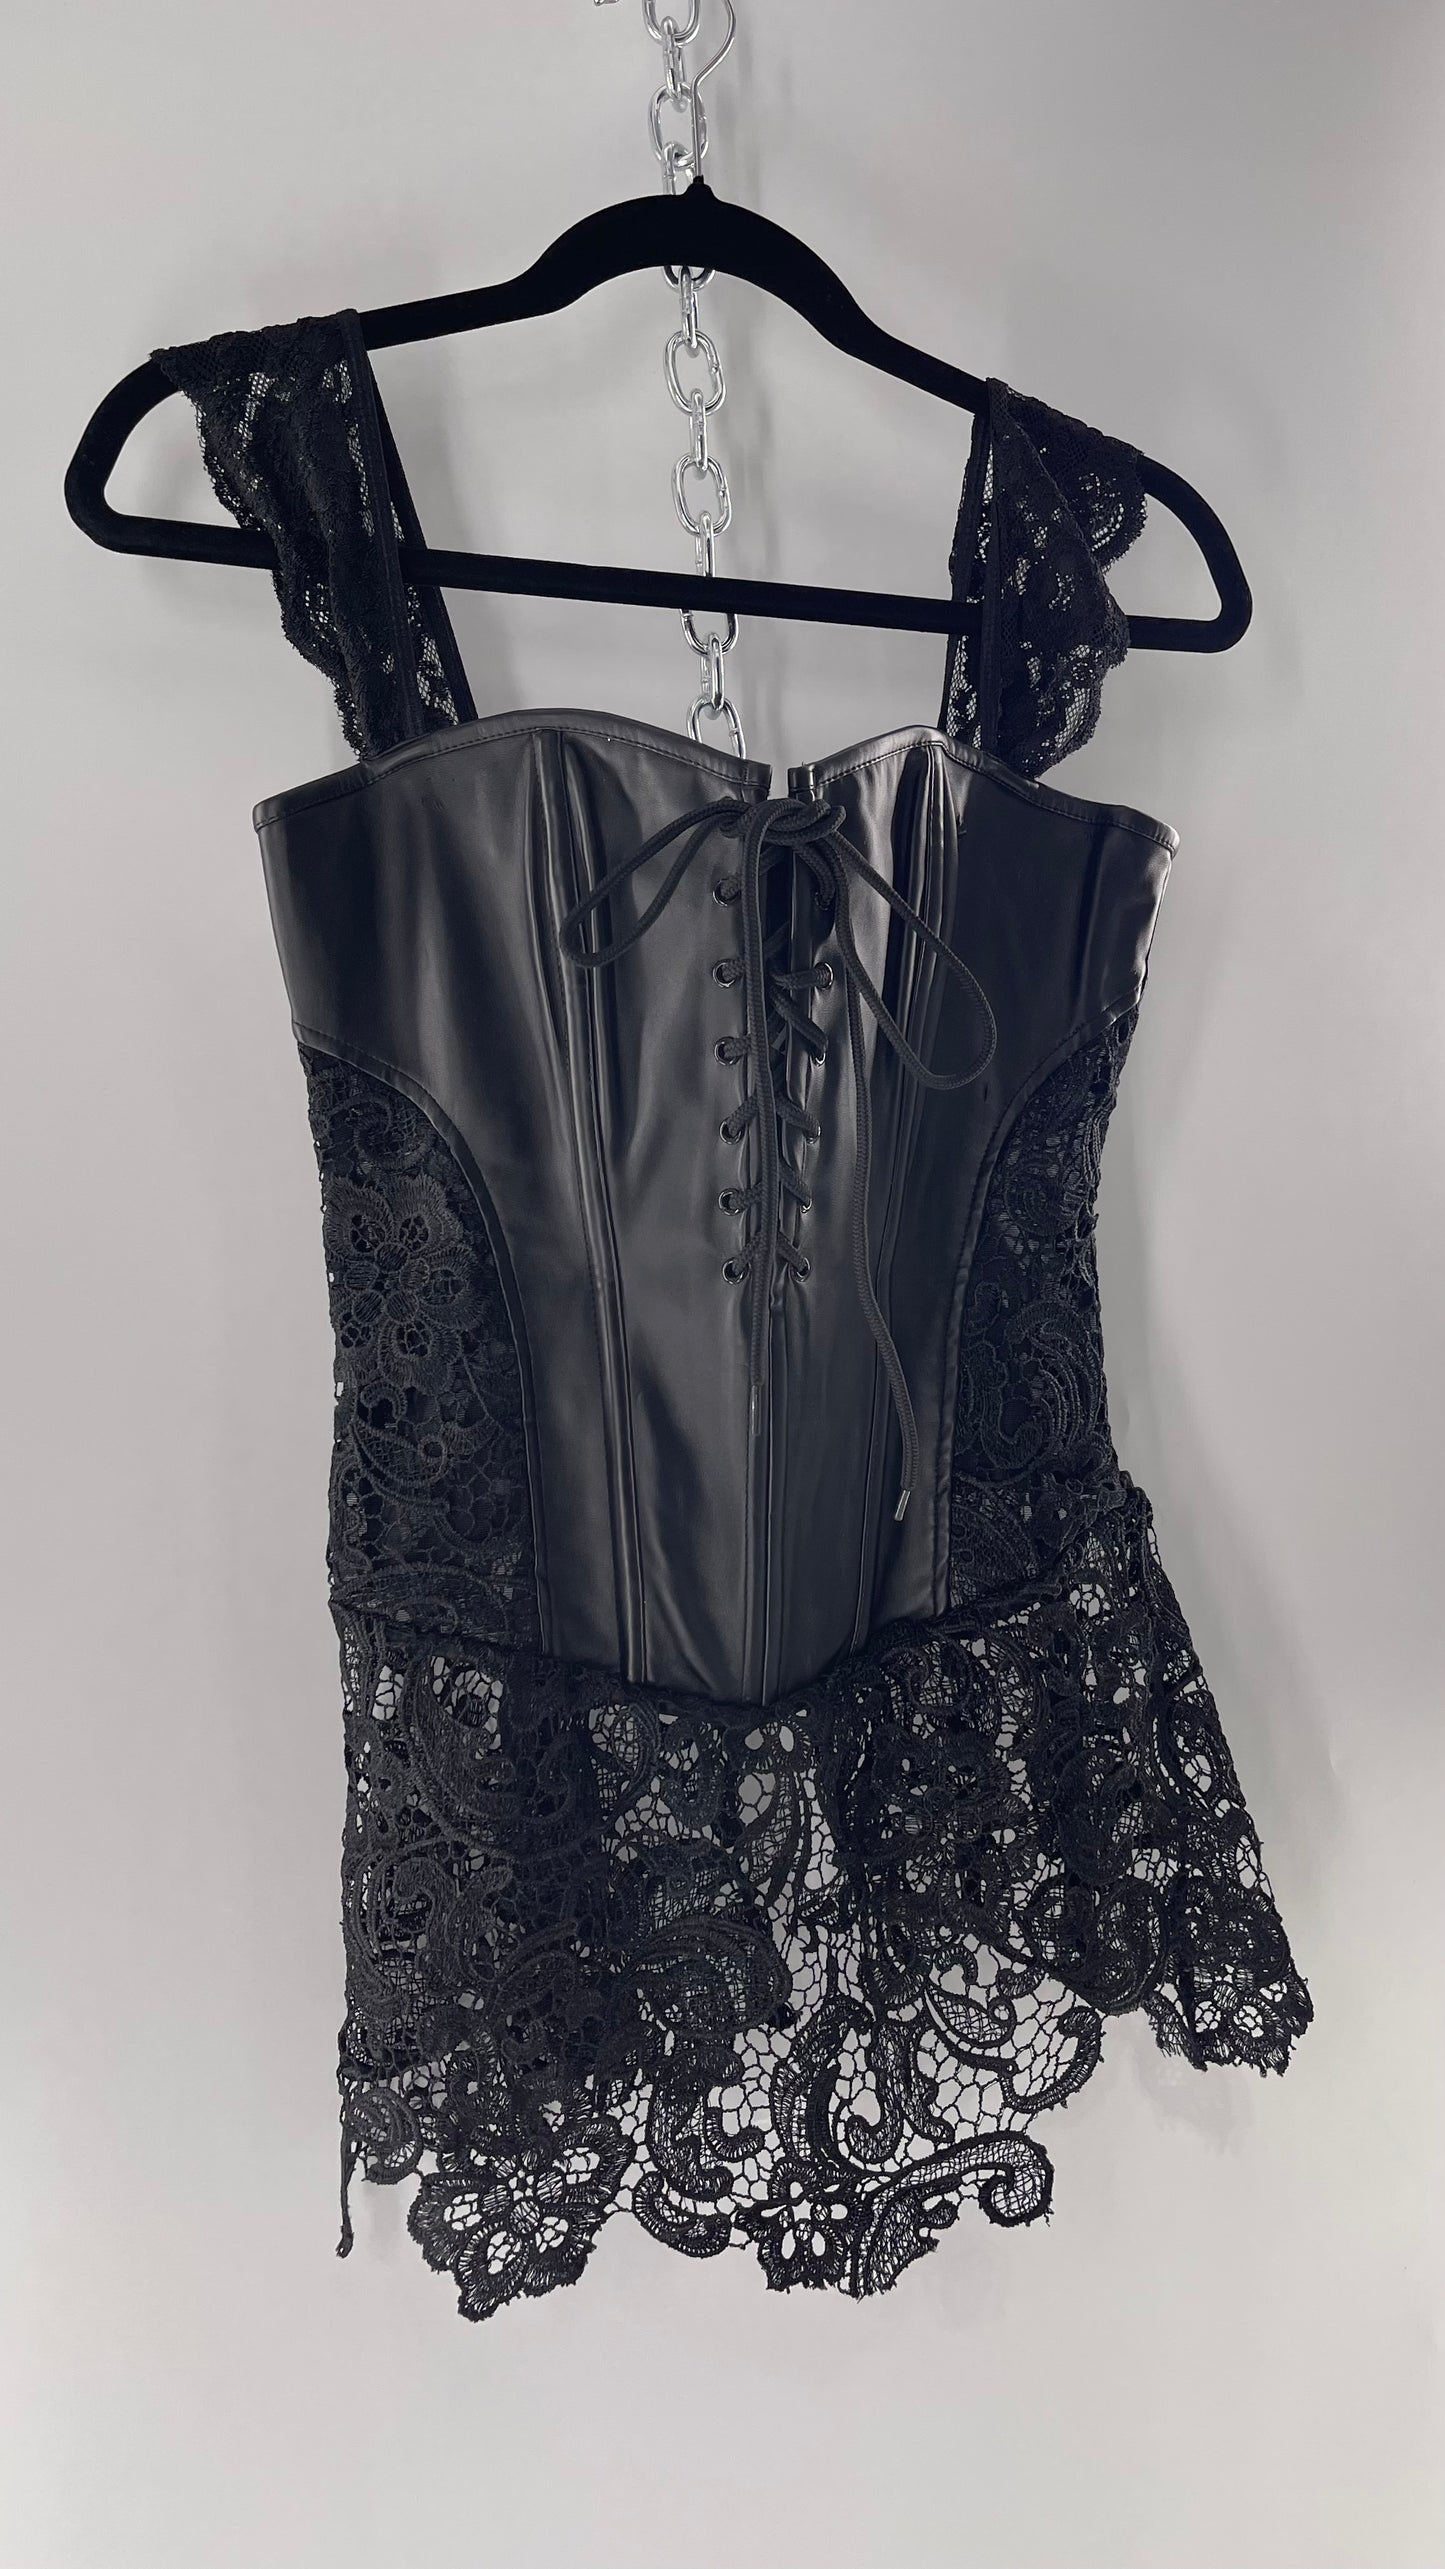 Black Vegan Leather/Lace Corset with Tie Front Details and Cap Sleeve (Large)